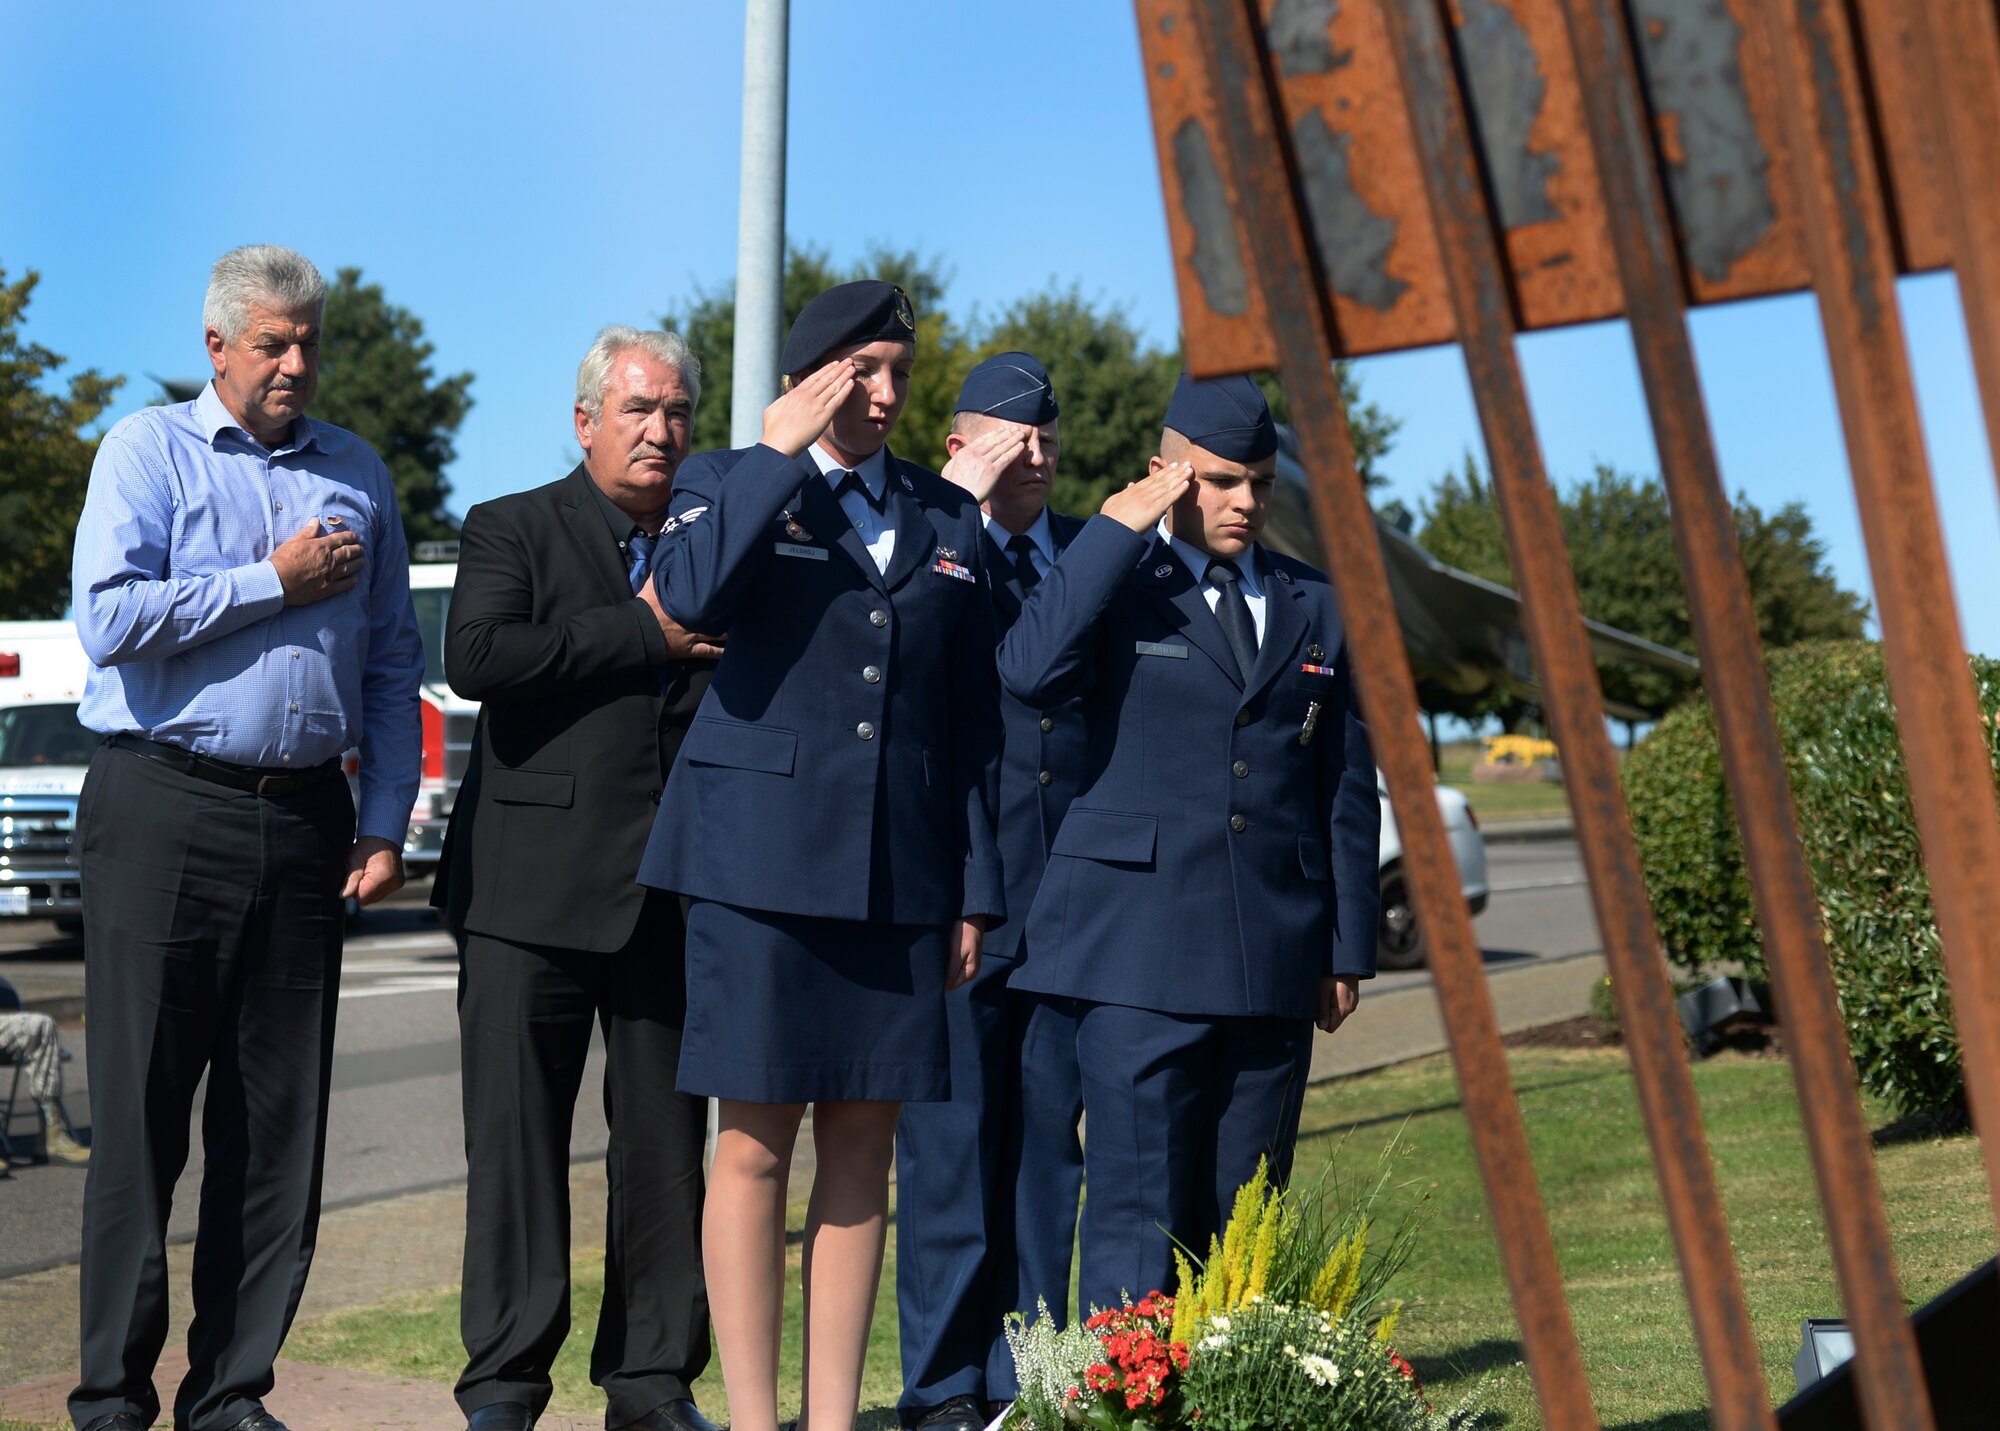 Local German community leaders and Airmen from the 52nd Fighter Wing pause to reflect during the 9/11 memorial service at Spangdahlem Air Base, Germany, Sept. 9, 2016. Local German and Air Force leadership spoke about the effects of attacks on the U.S. created a stronger alliance with German and NATO partners. (U.S. Air Force photo/Senior Airman Dawn M. Weber)